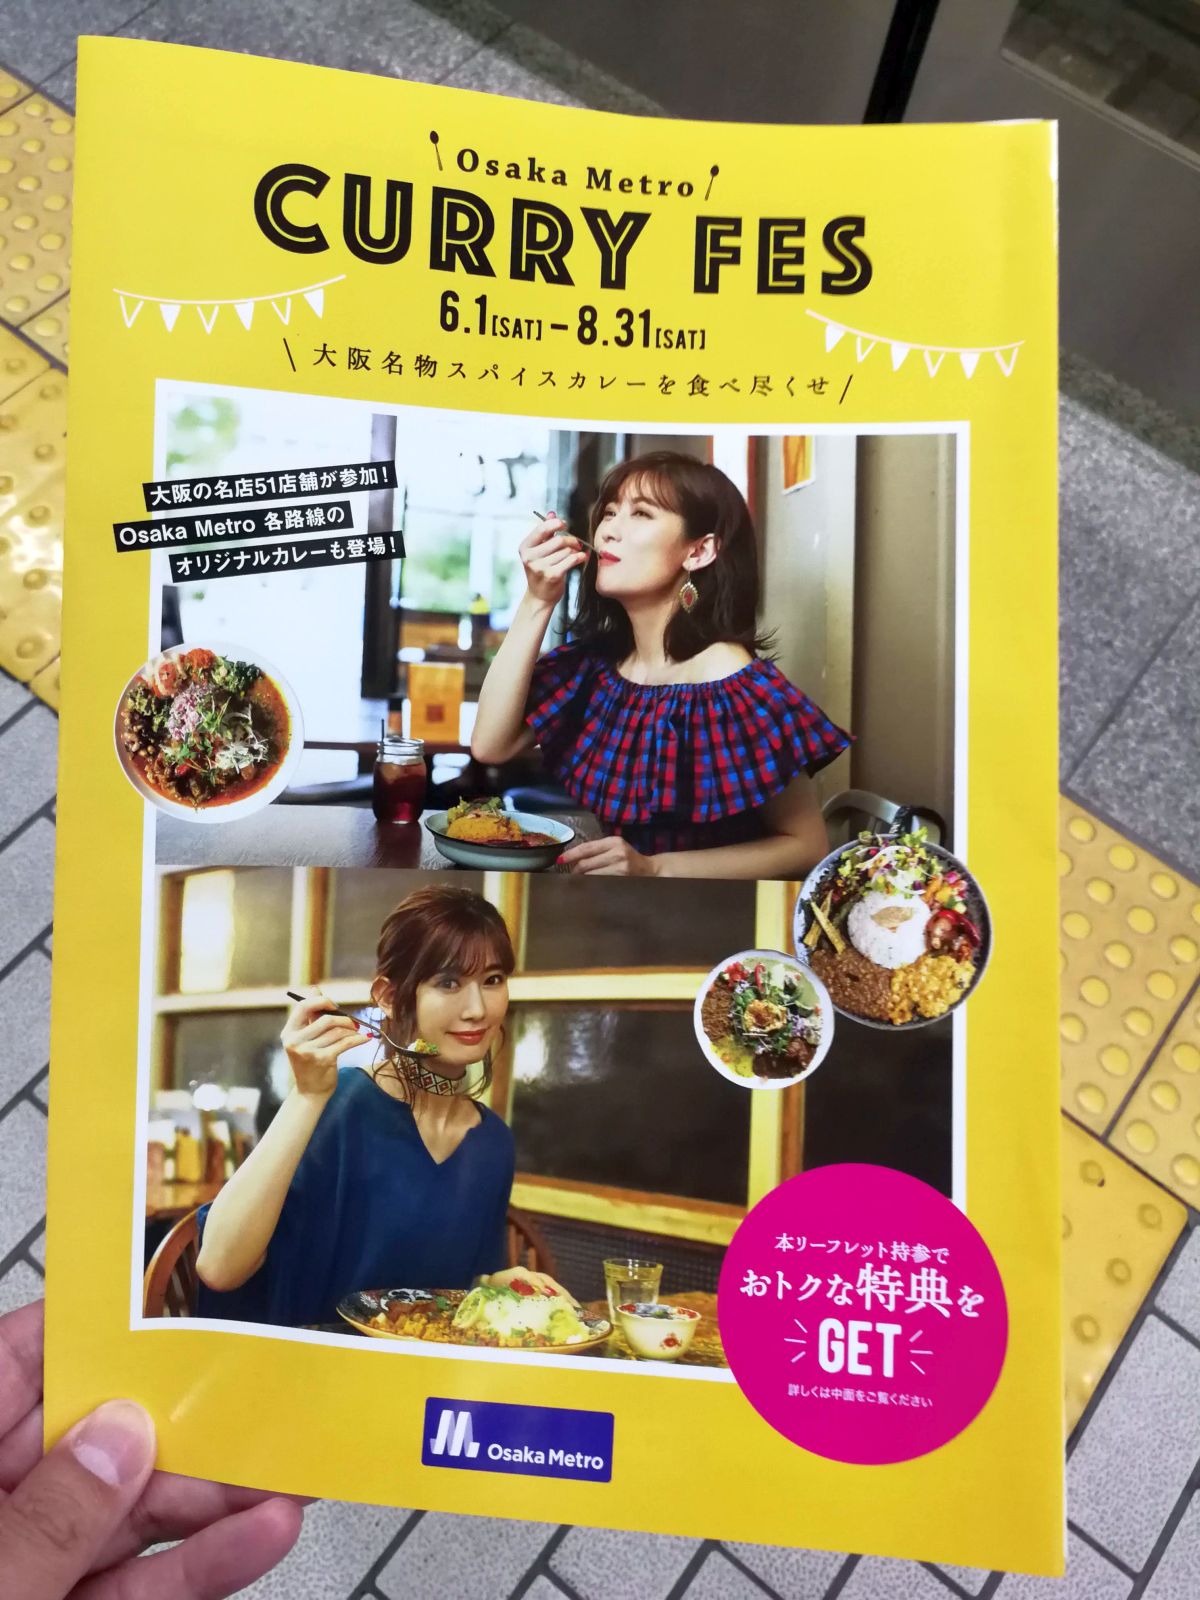 CURRY FES